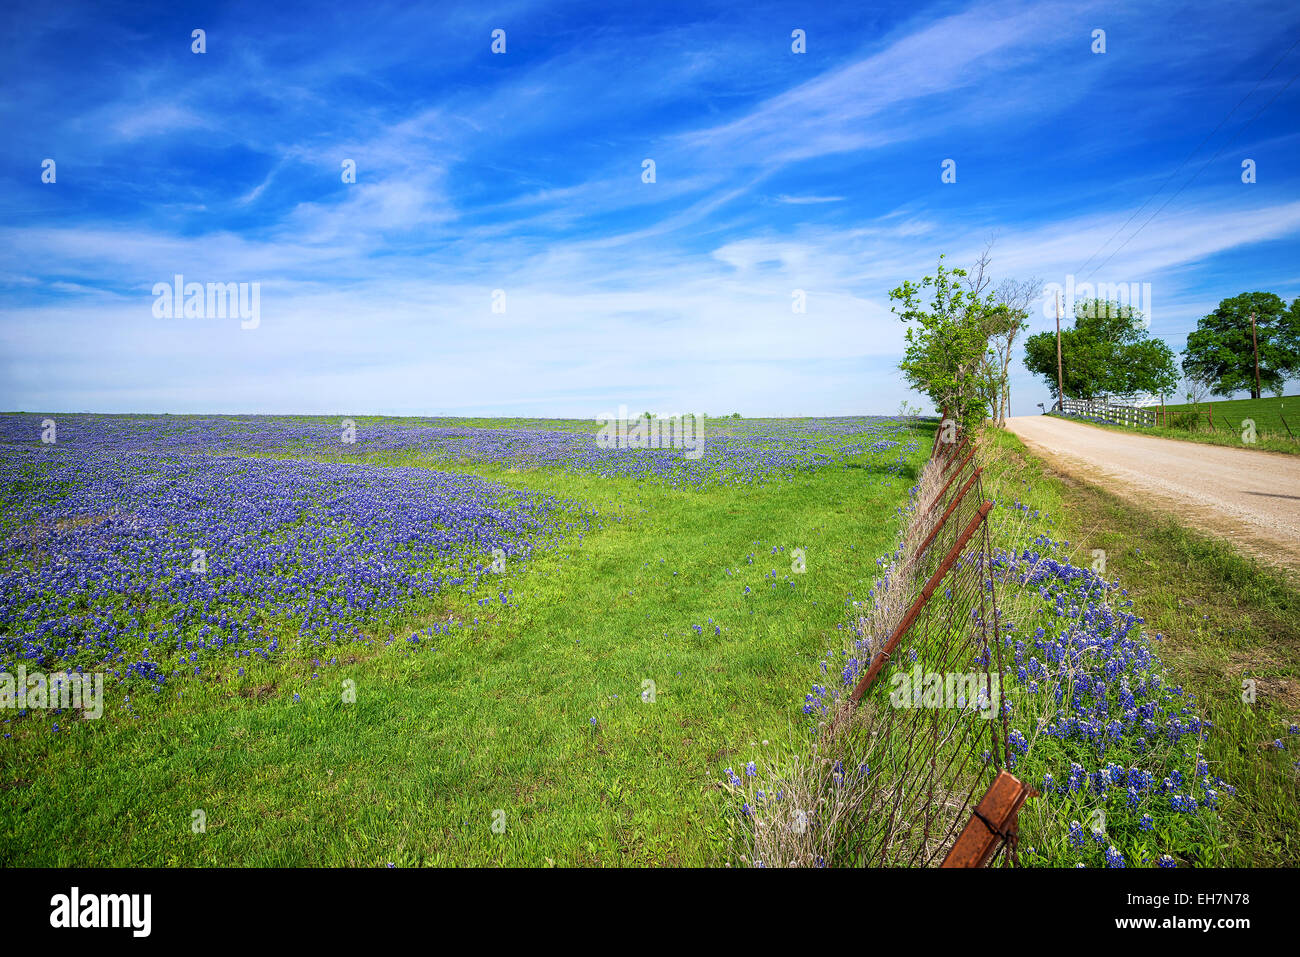 Bluebonnet field and a fence along a country road in Texas spring Stock Photo